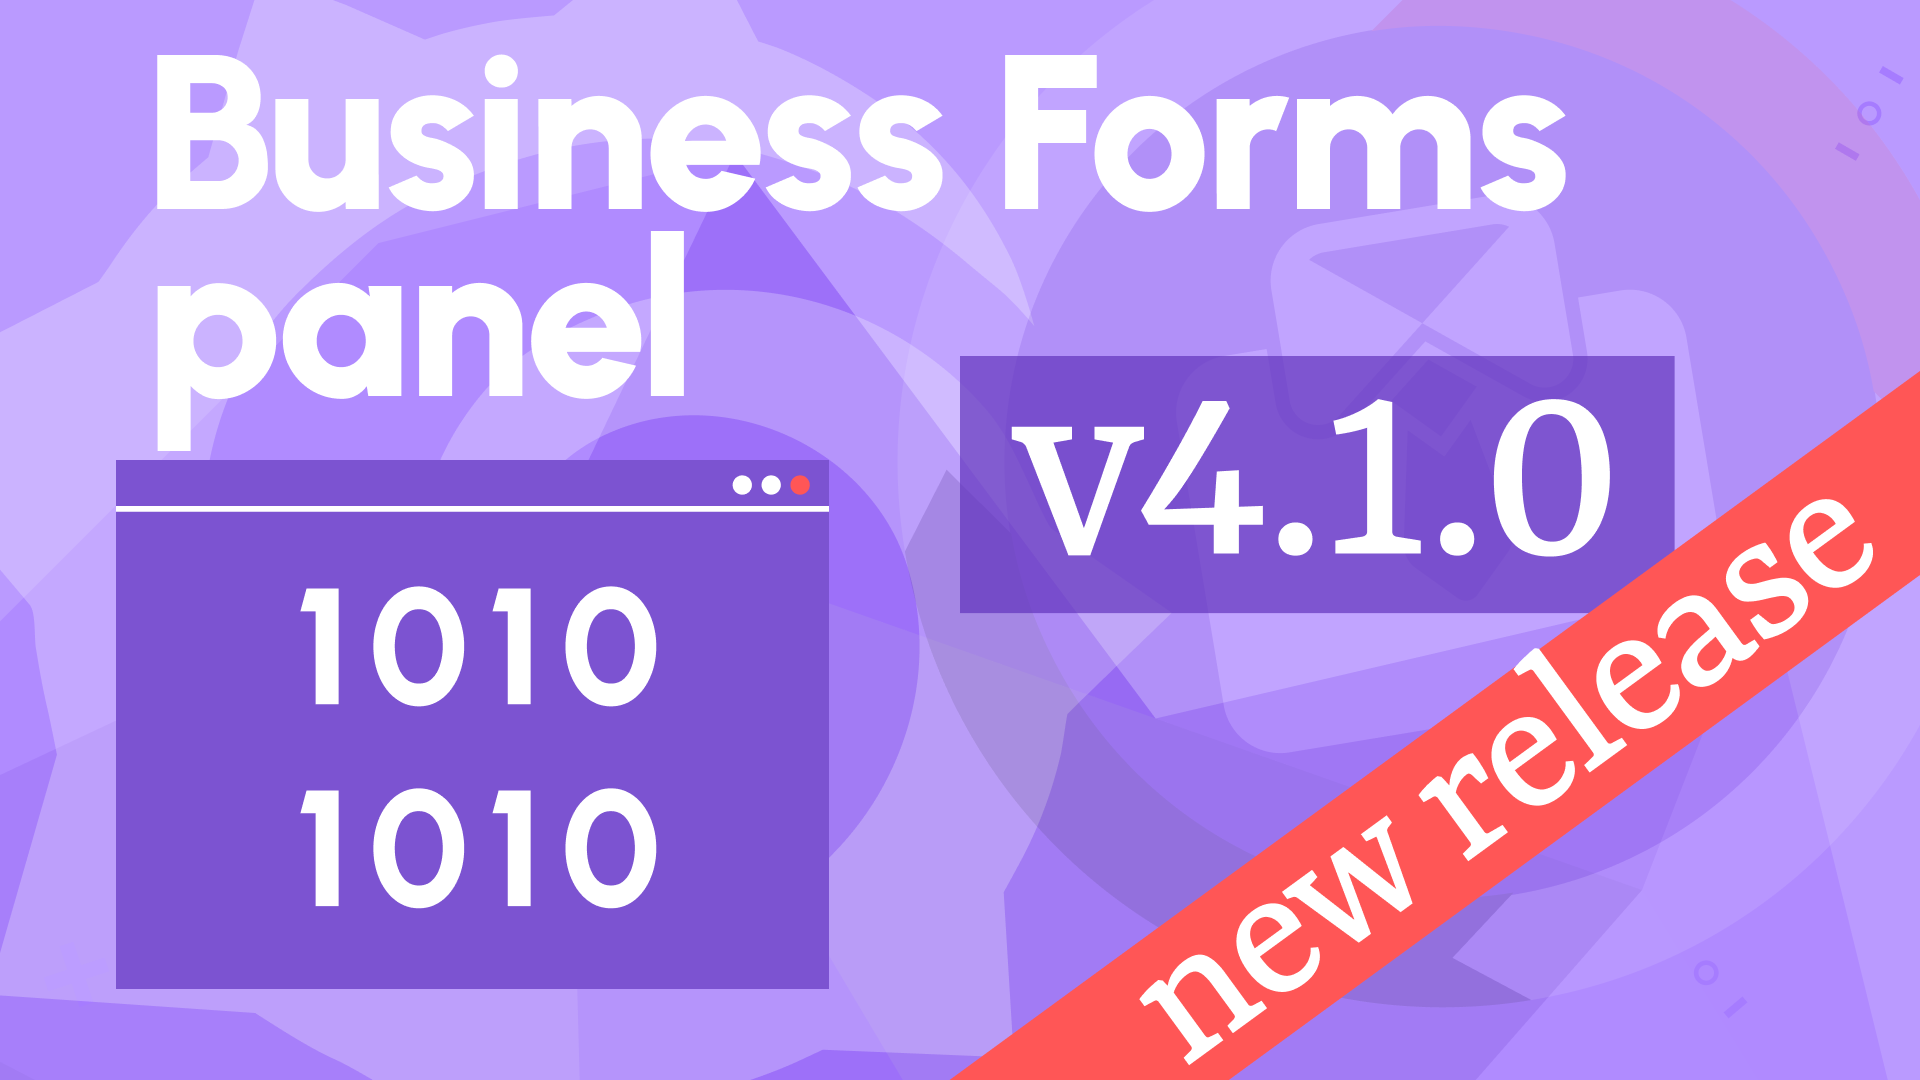 Business Forms Panel 4.1.0